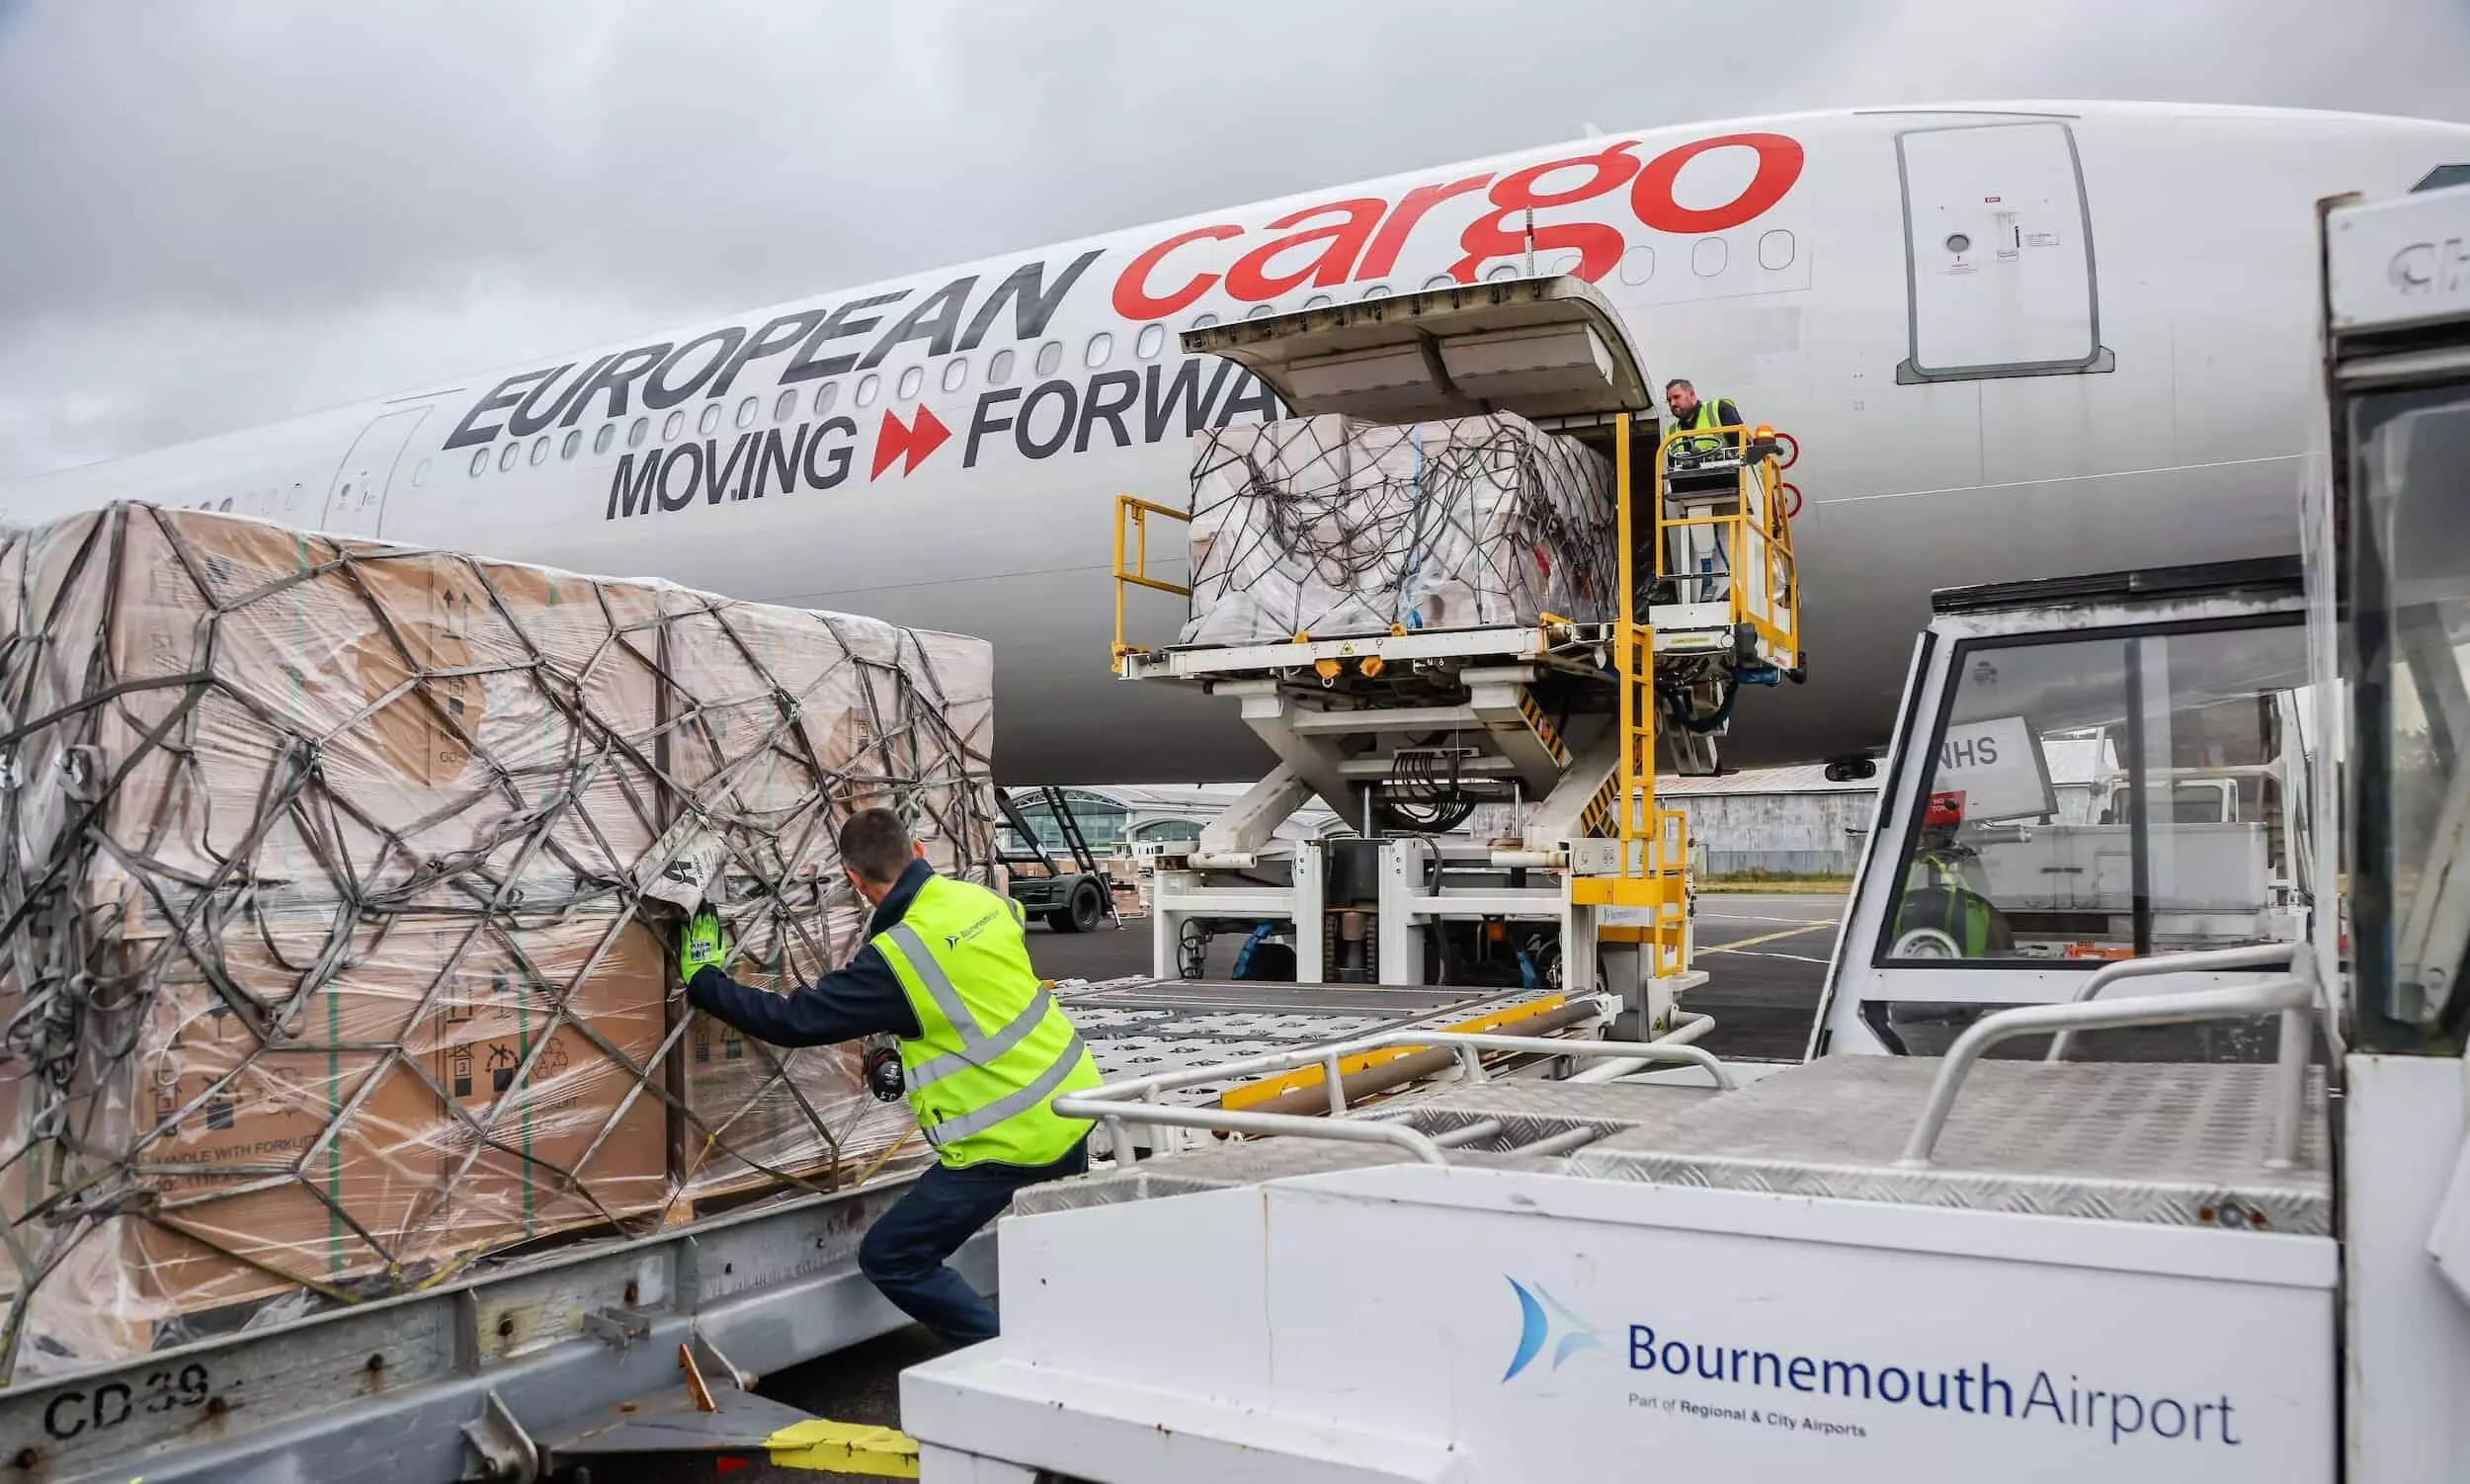 China-UK air freight capacity increases through Bournemouth Airport